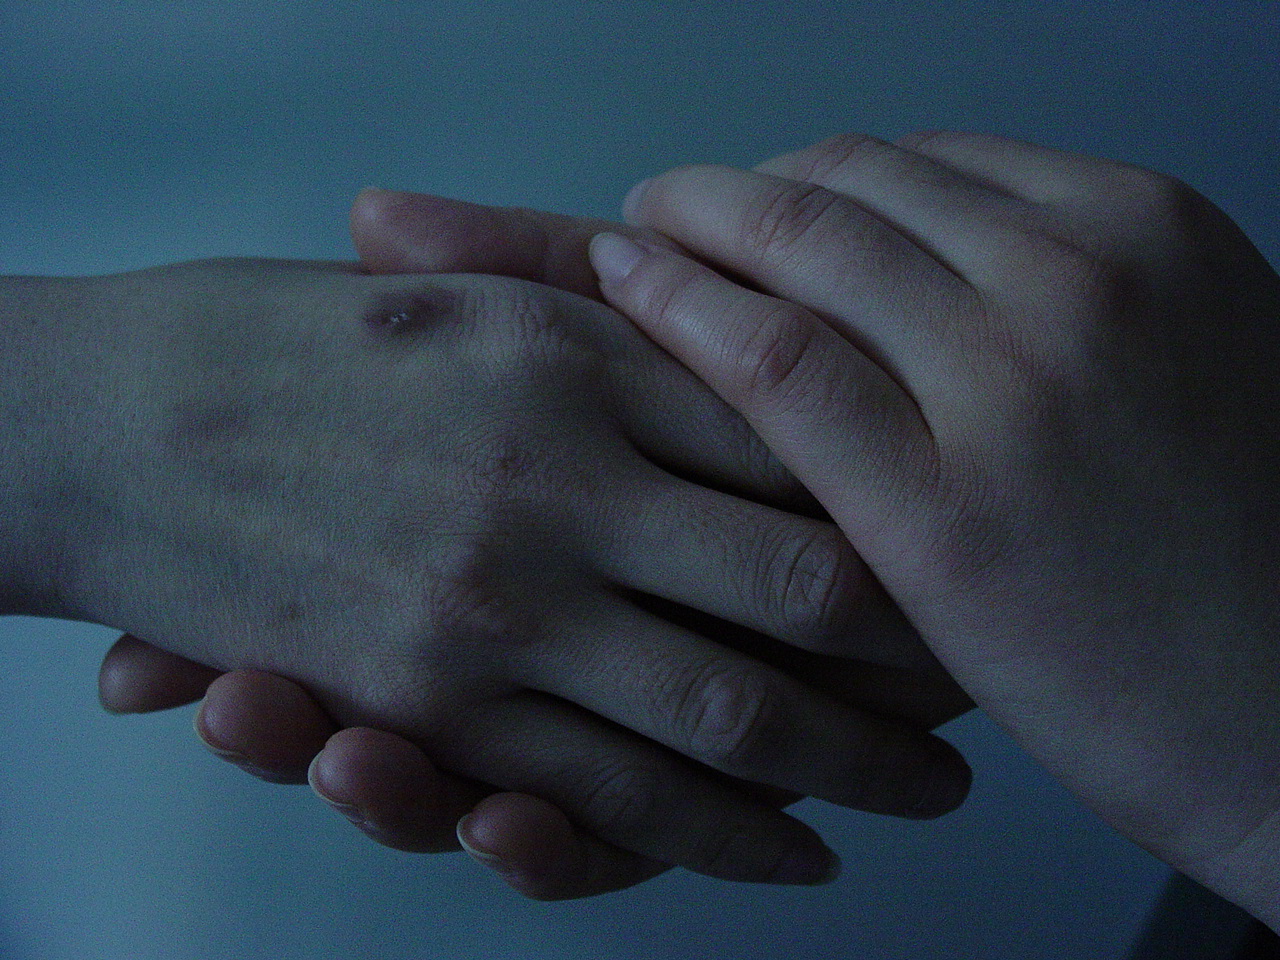 Still from Sisters. A dimly lit close-up of the hands of two people. The bruised hand of one person is held gently, supported from the bottom and the top, by both hands of the other.